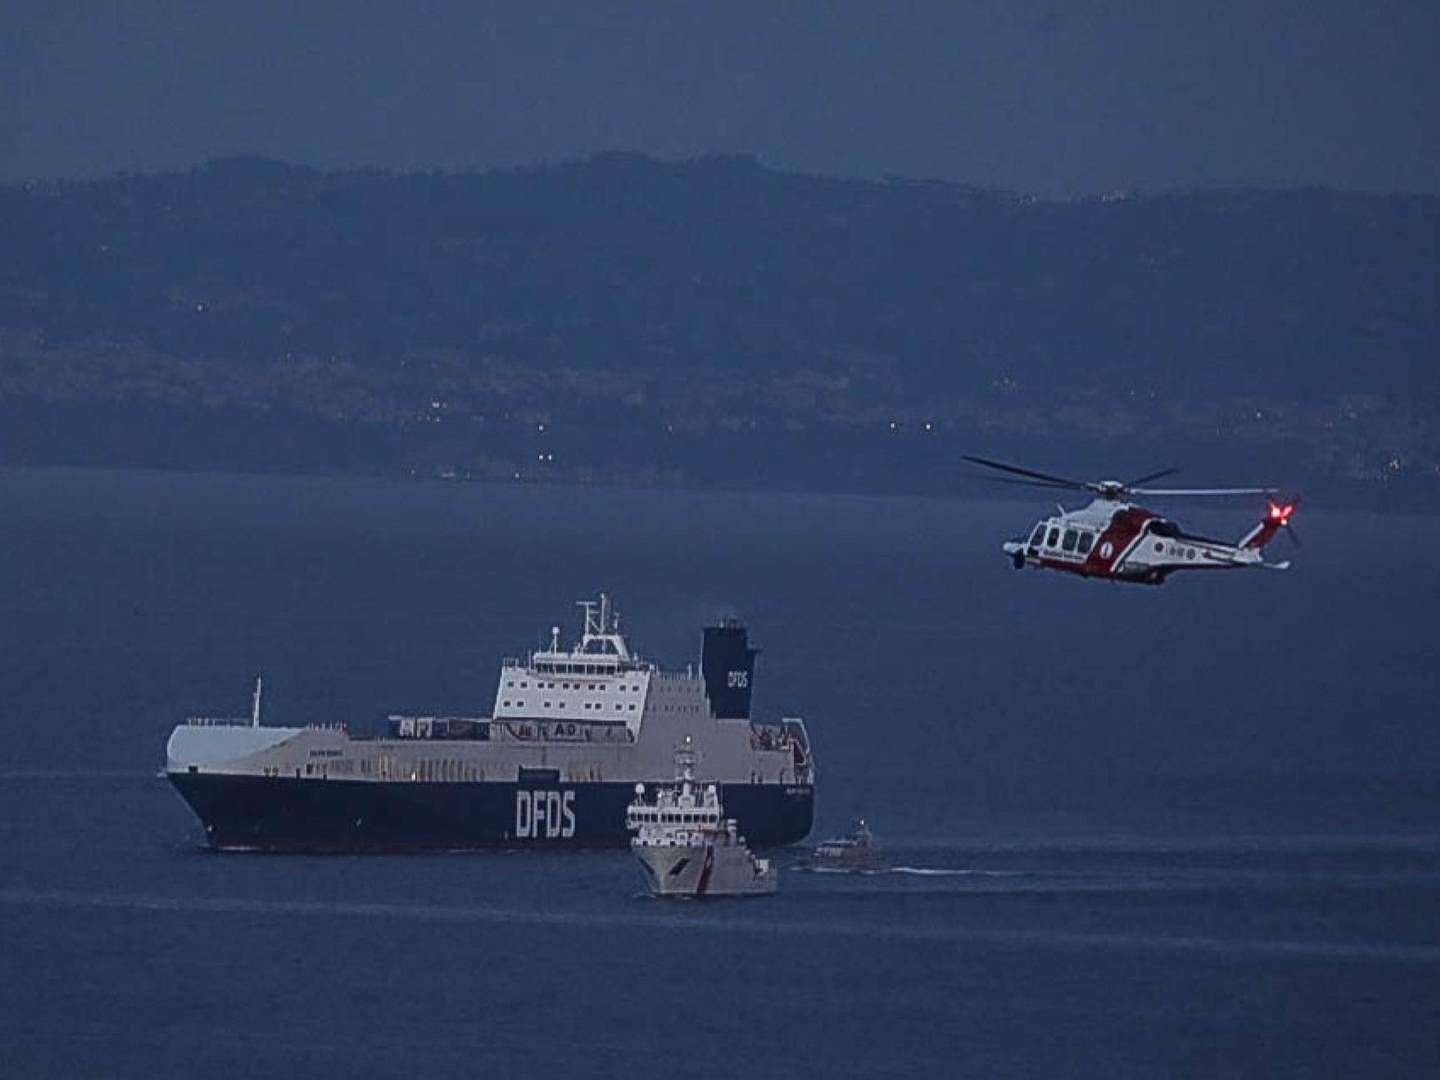 Cargo ship Galatea Seaways was subsequently escorted by Italian authorities to the Port of Naples after a special operation saw 15 migrants detained by Italian special forces. | Photo: -